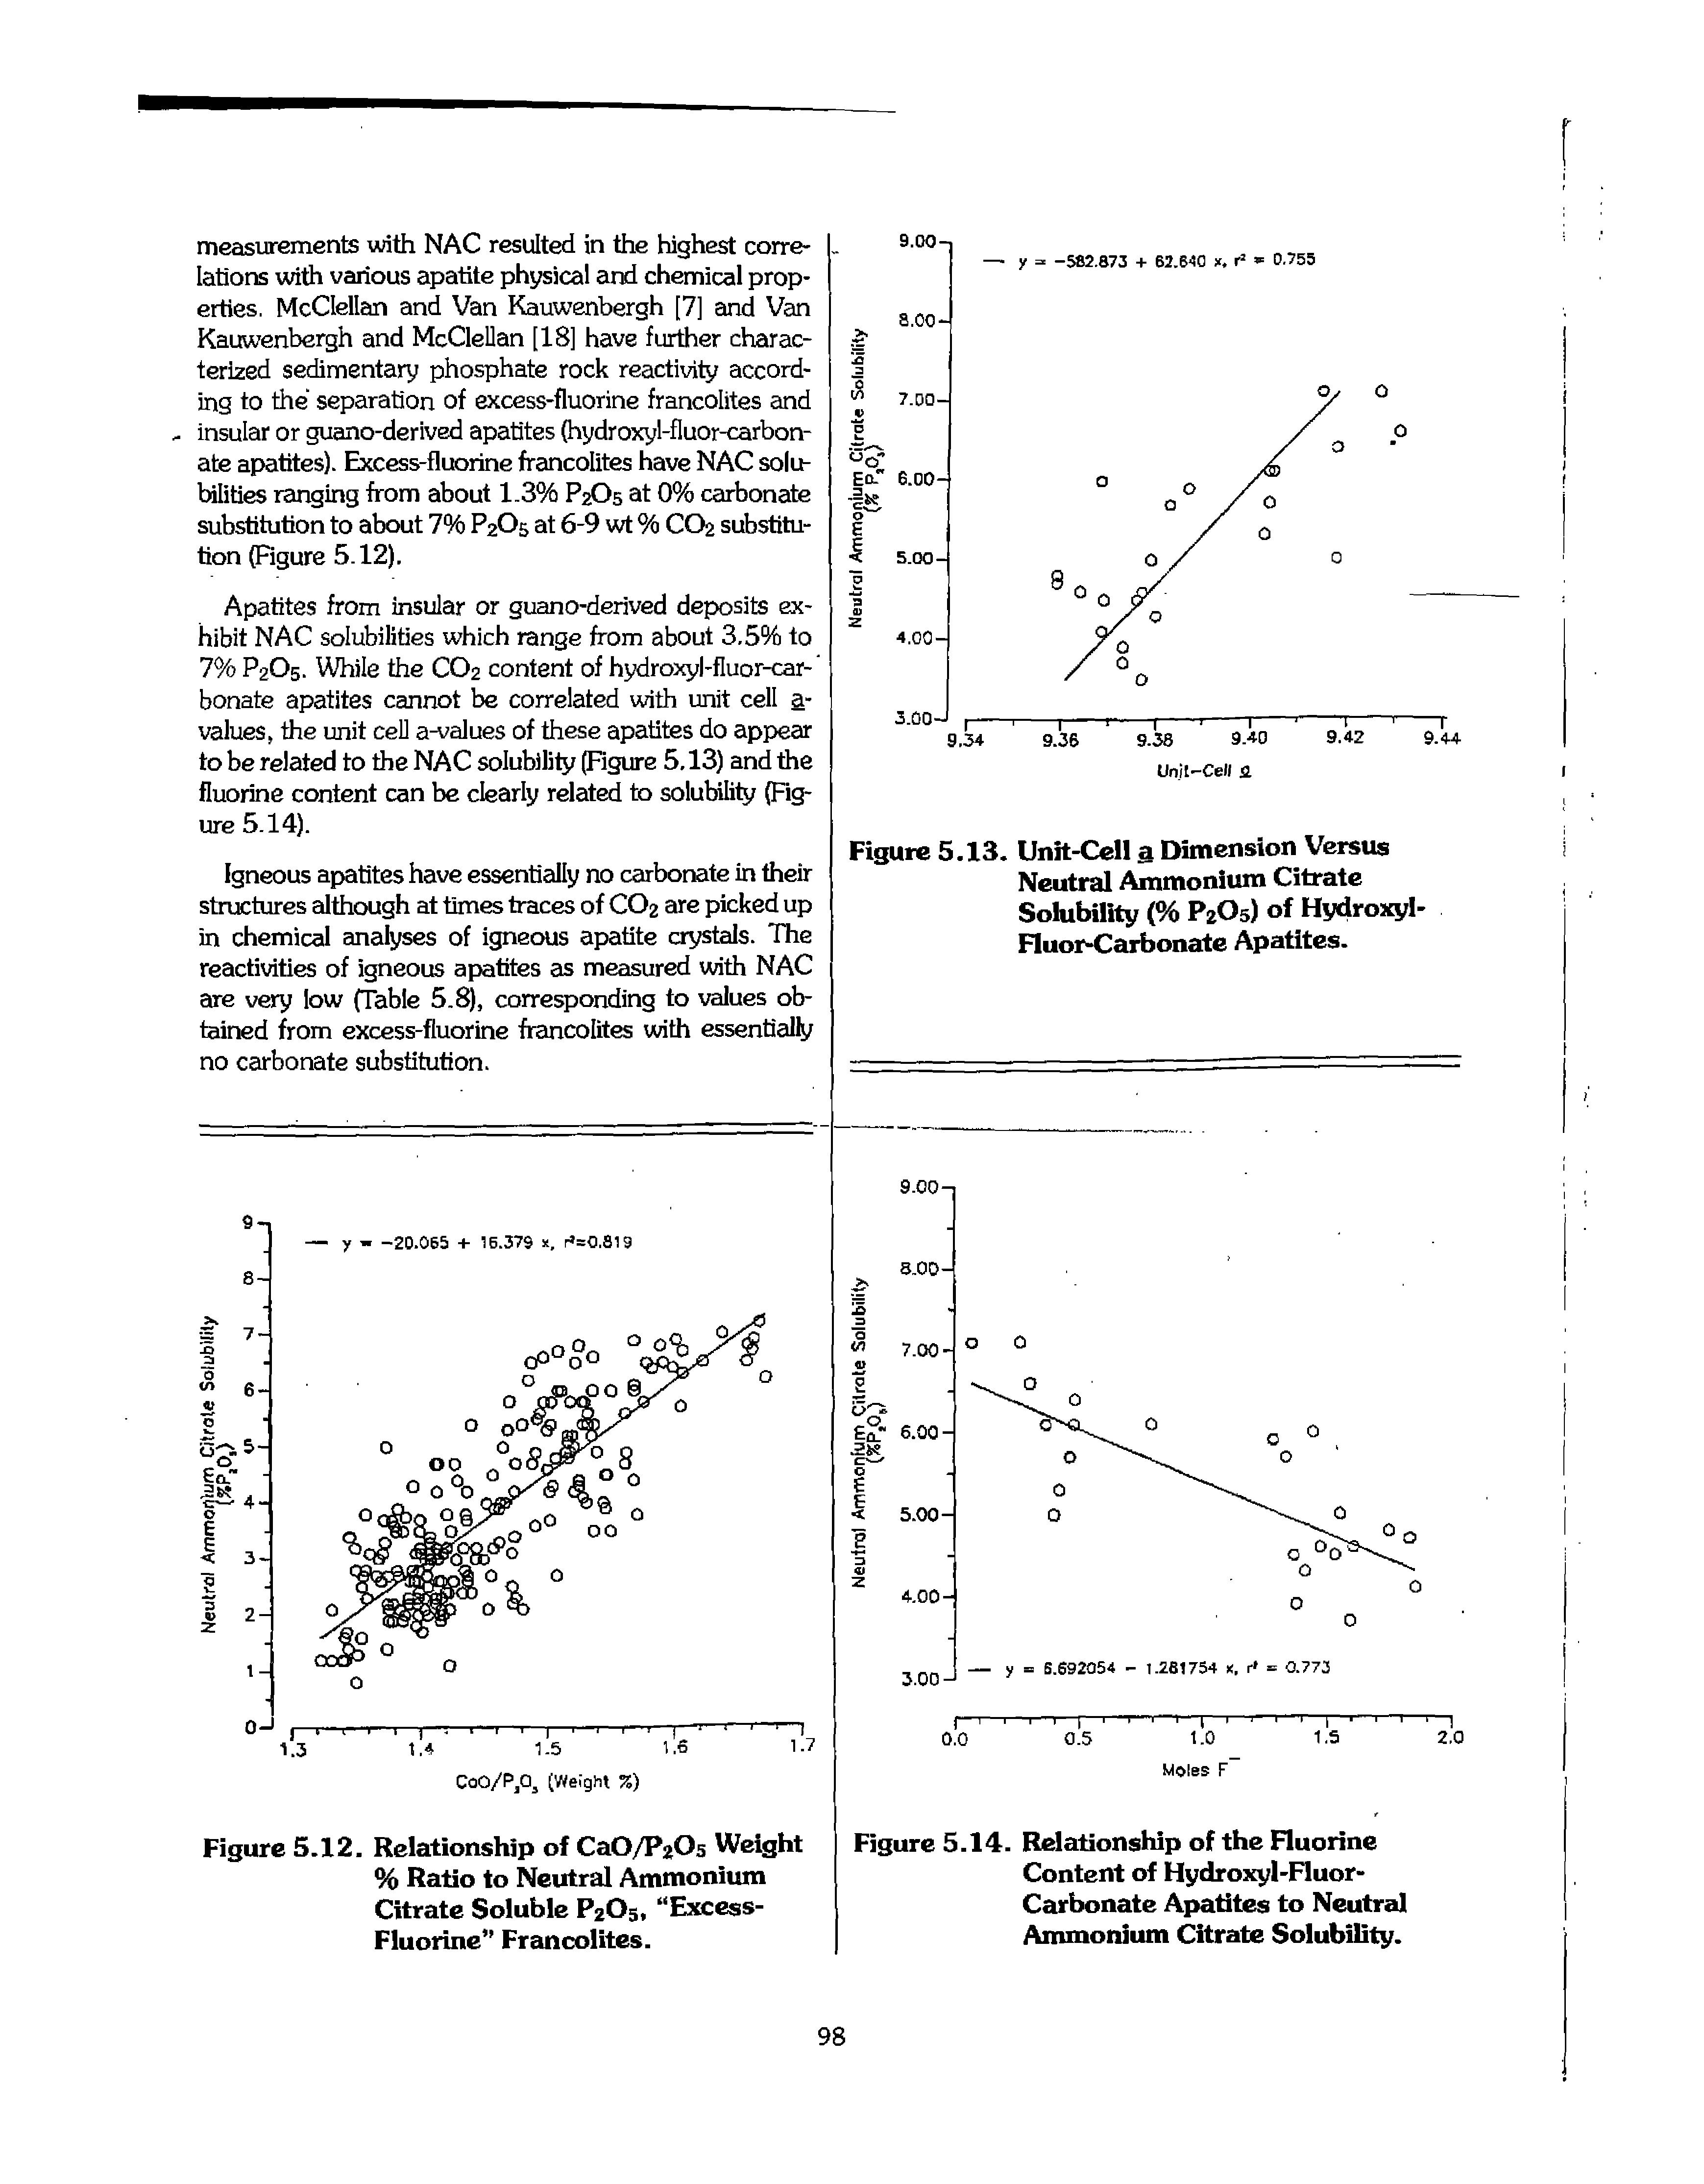 Figure 5.14. Relationship of the Fluorine Content of Hydroxyl-Fluor-Carbonate Apatites to Neutral Ammonium Citrate Solubility.